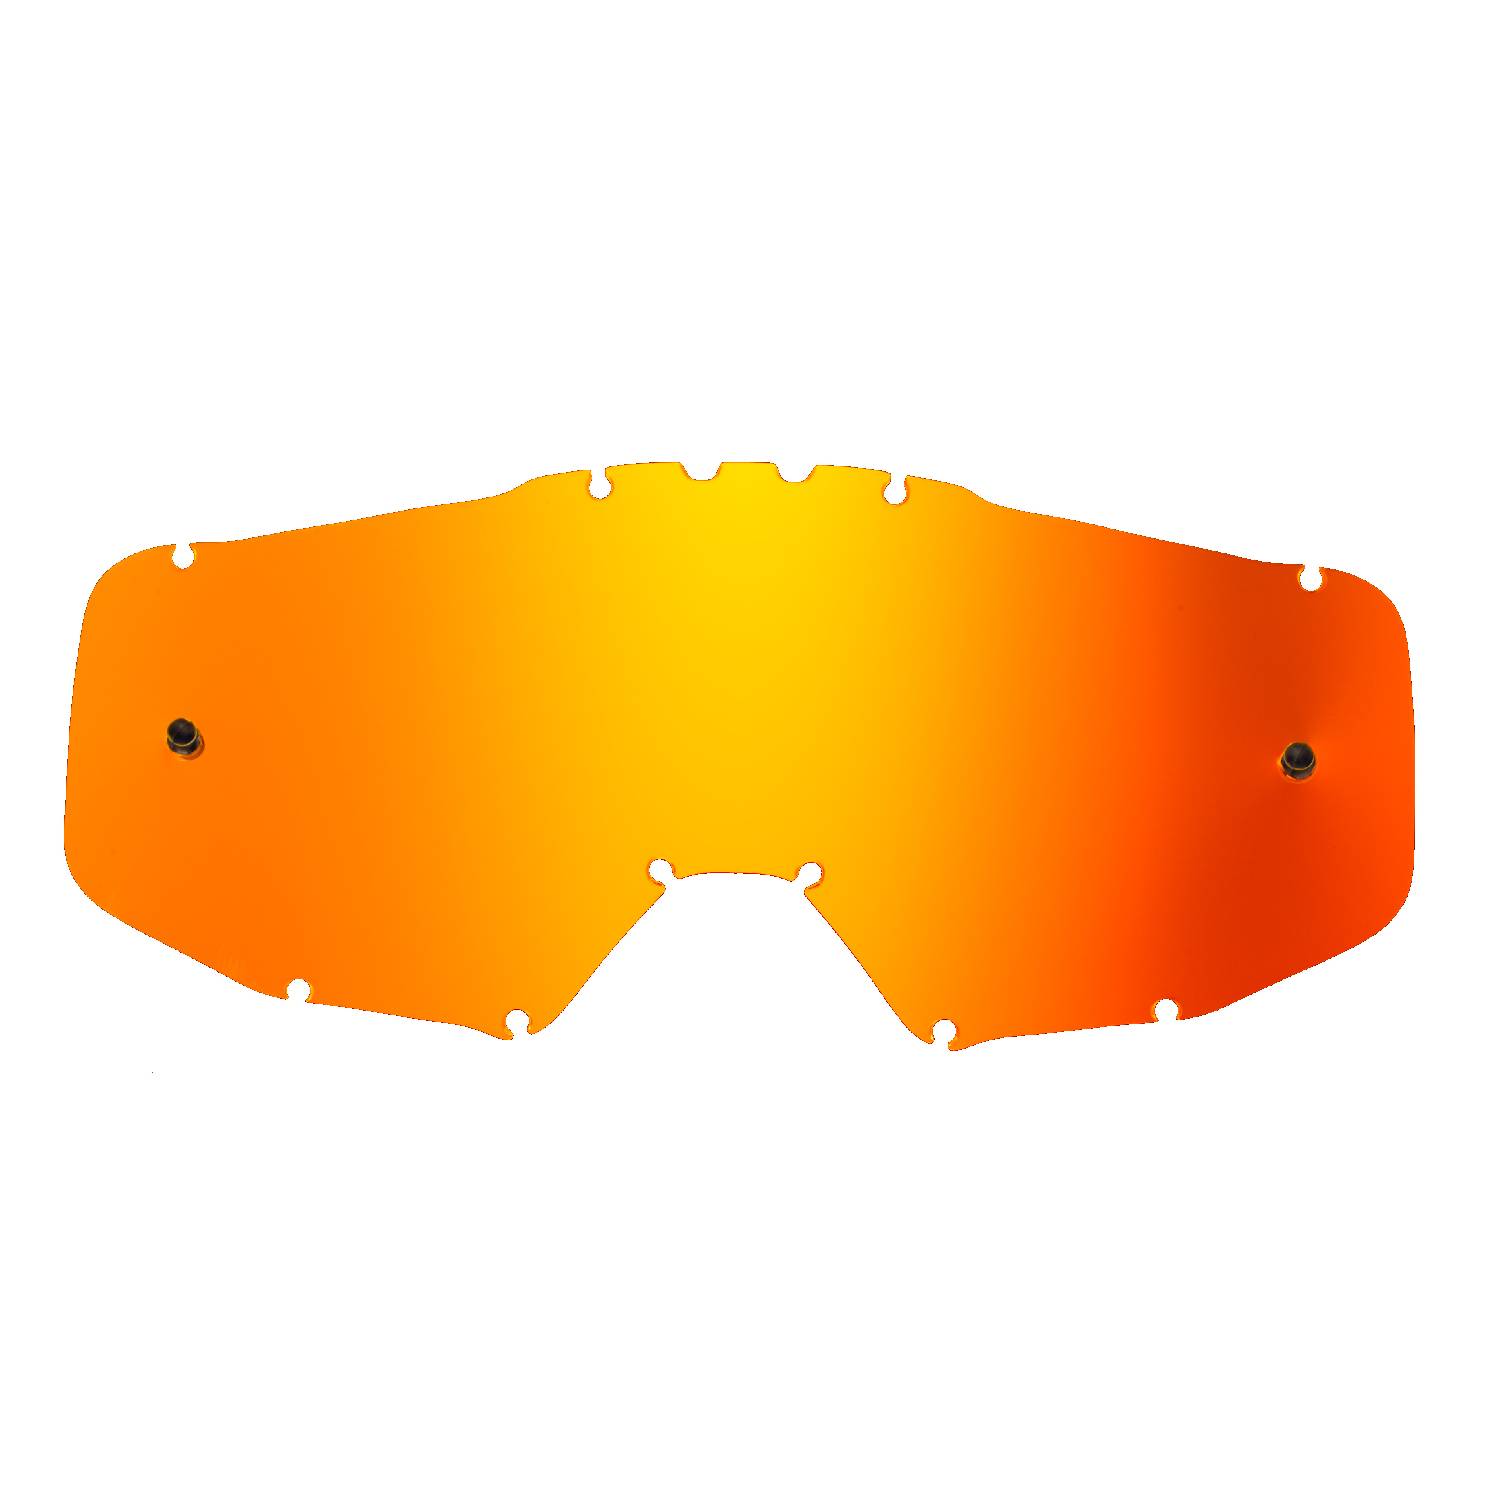 red-toned mirrored replacement lenses for goggles compatible for Just1 Iris / Vitro goggle